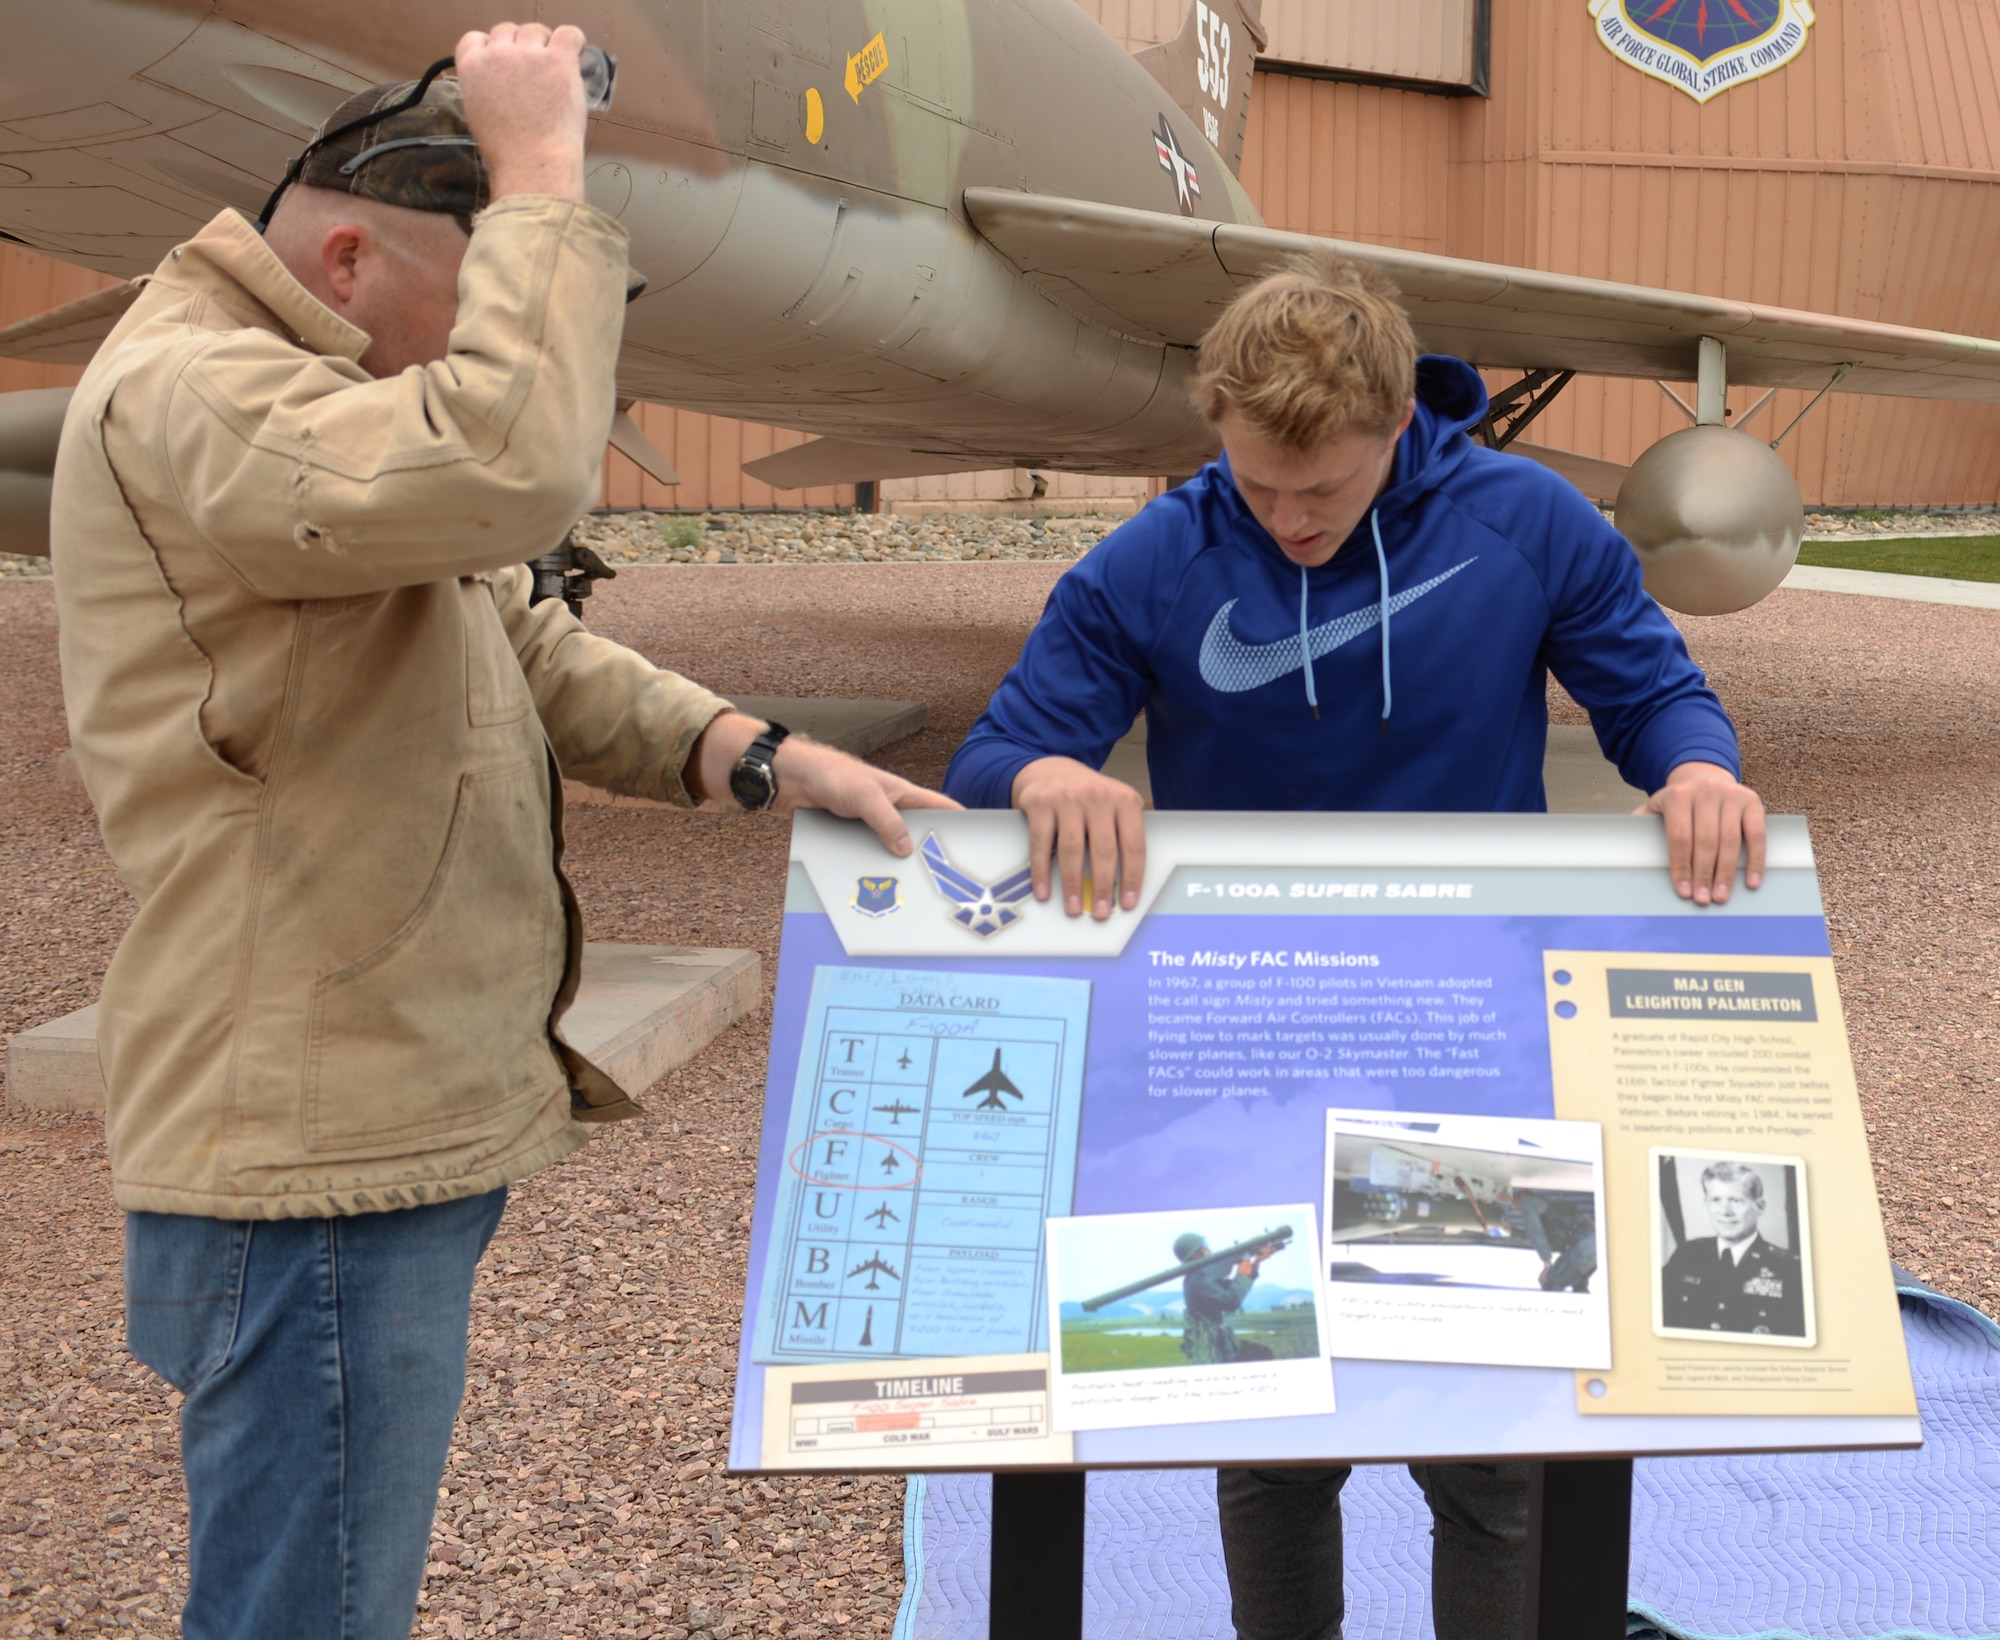 Ryan Ahrenstorff, an eagle scout with Troop 72 from Rapid City, and Master Sgt. Mark Wight, the curator assigned to the South Dakota Air and Space Museum, position a sign in front of an F-100A Super Sabre static display as part of the Adopt-A-Plane Program in Box Elder, S.D., Sept. 23, 2017. Multiple units from Ellsworth Air Force Base and private organizations around the area are adopting aircraft and taking them on as their own by washing, bird proofing and performing minor upkeep. (U.S. Air Force photo by Airman 1st Class Thomas Karol)